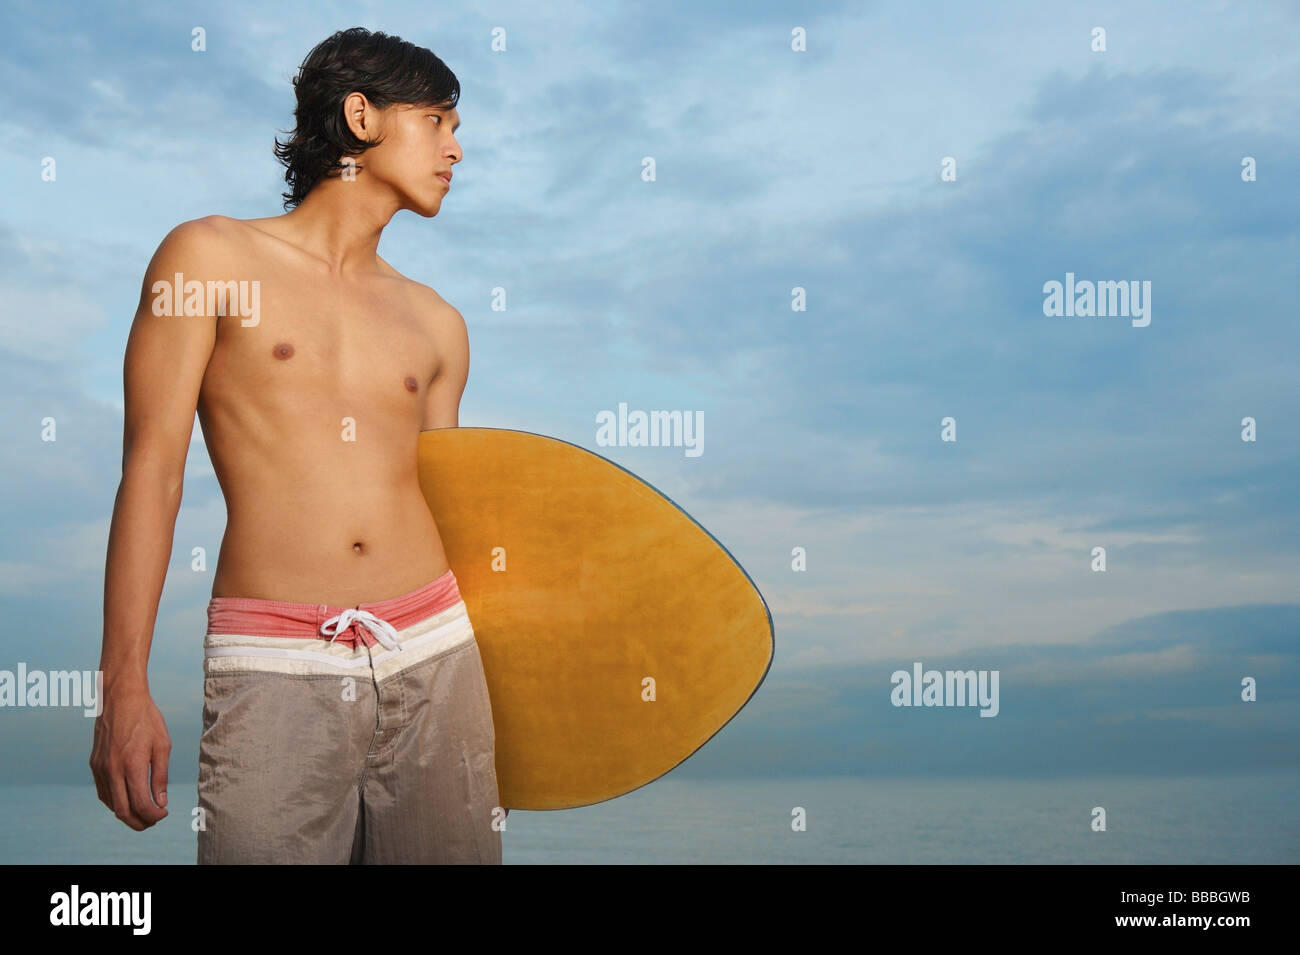 Young man holding skimboard, looking away Stock Photo